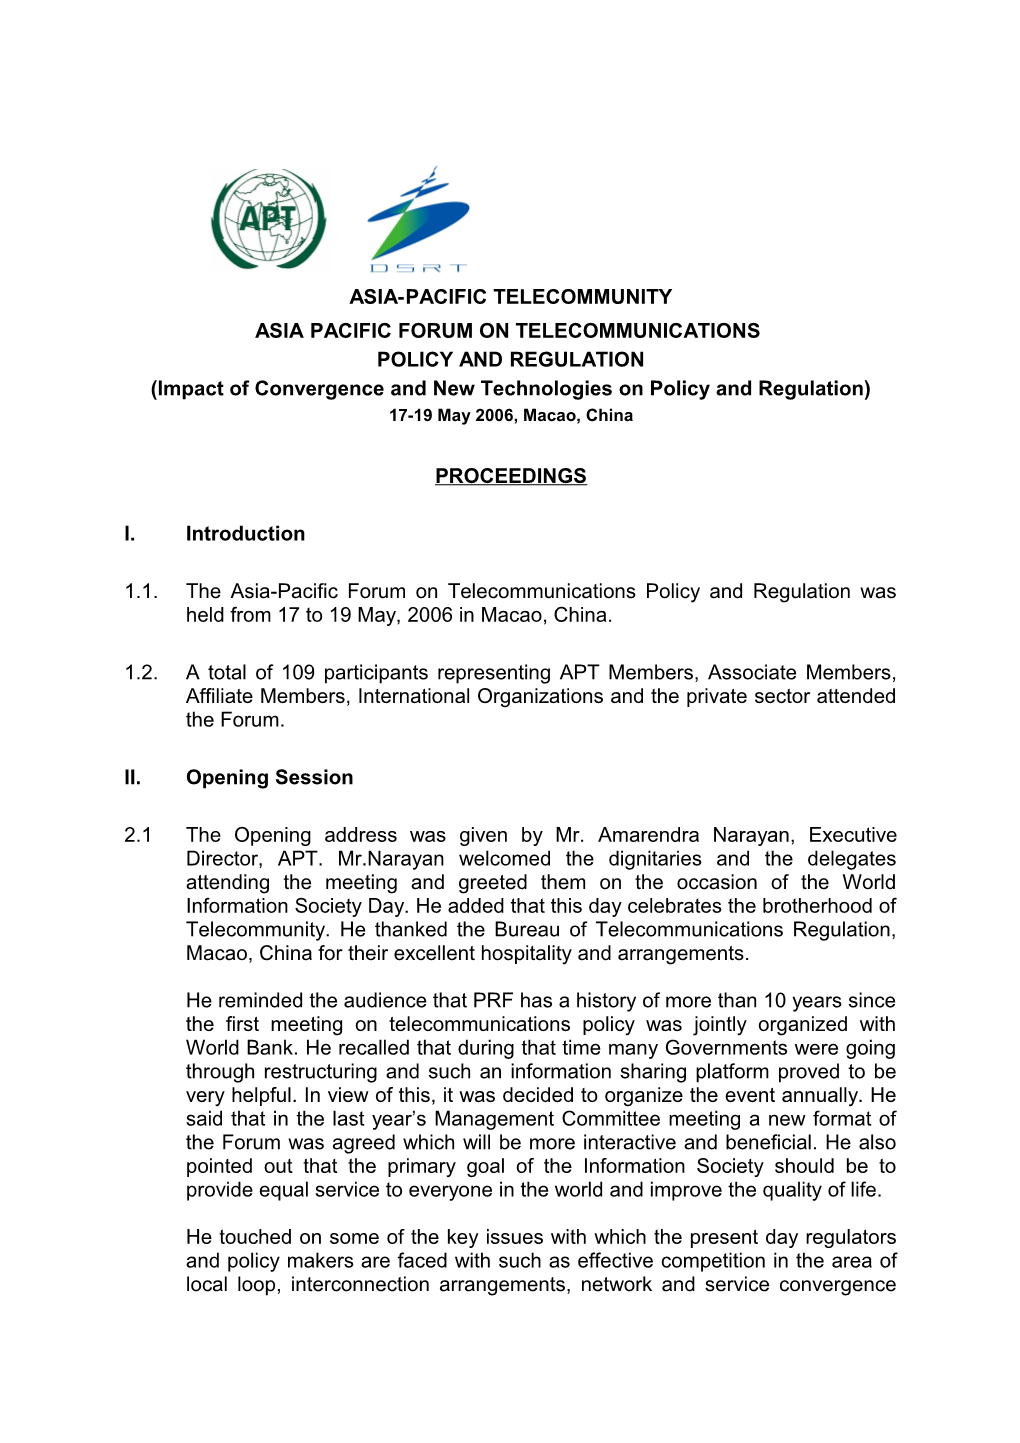 Asia-Pacific Forum on Telecommunications Policy and Regulation s1